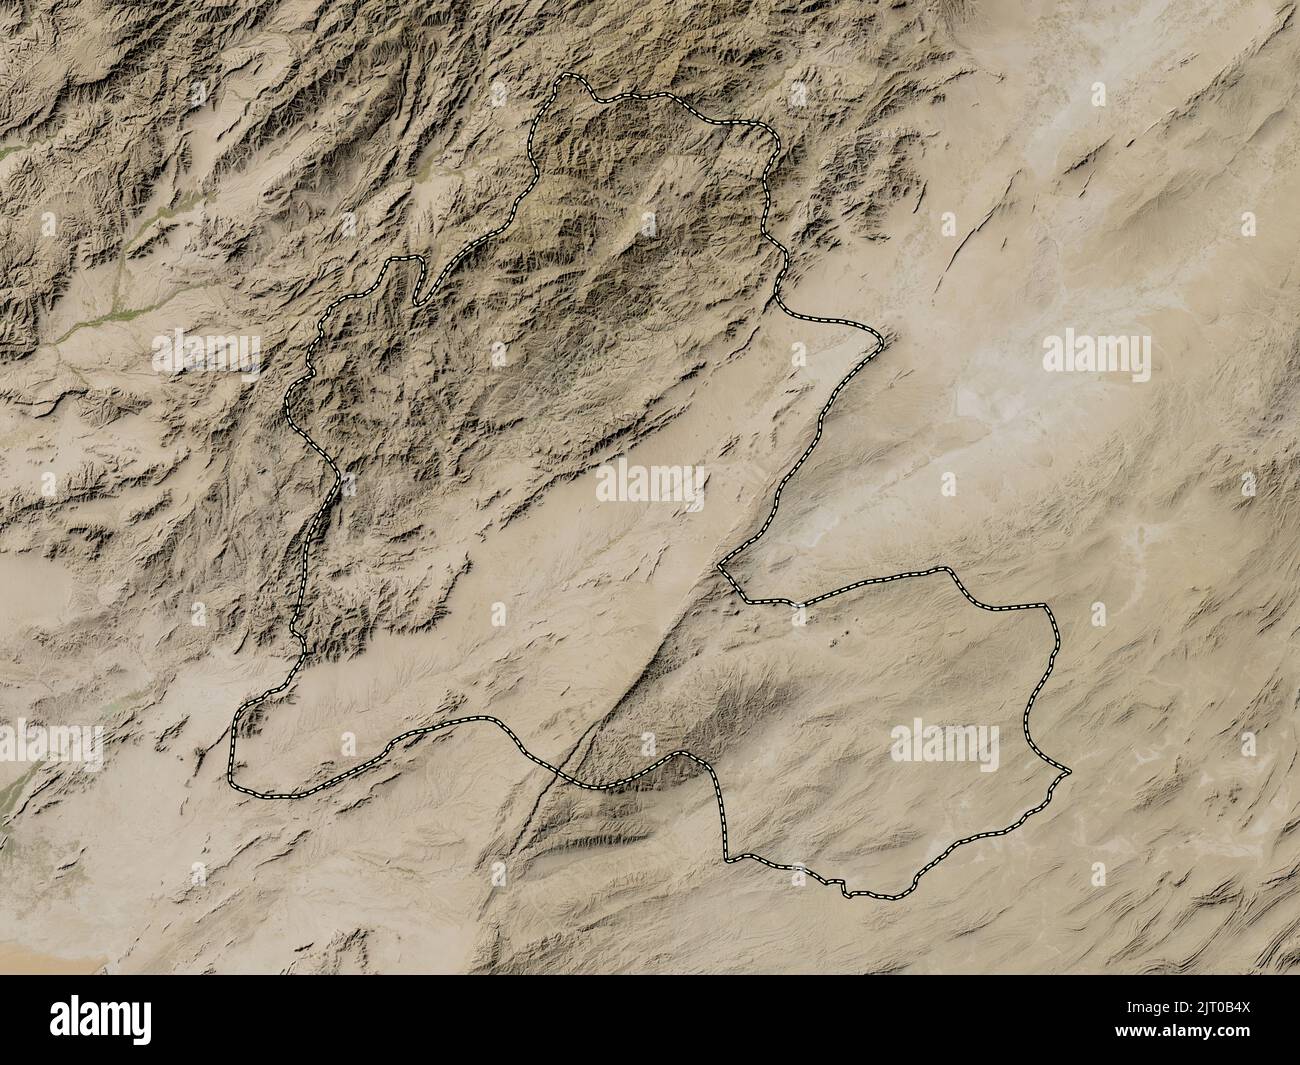 Zabul, province of Afghanistan. Low resolution satellite map Stock Photo